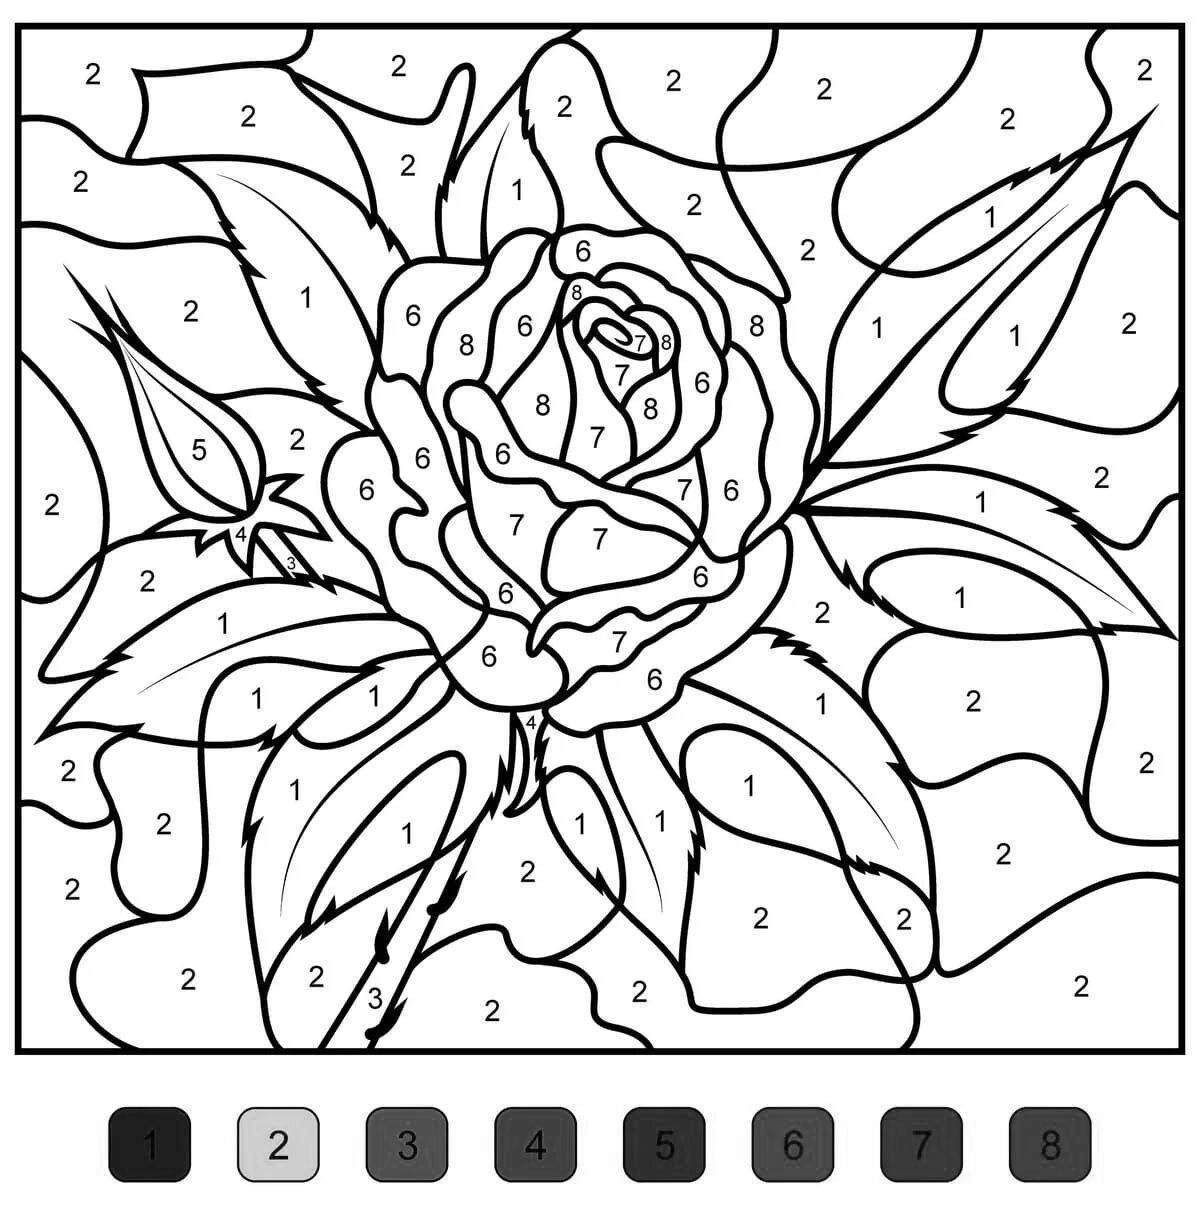 Relaxing coloring by numbers